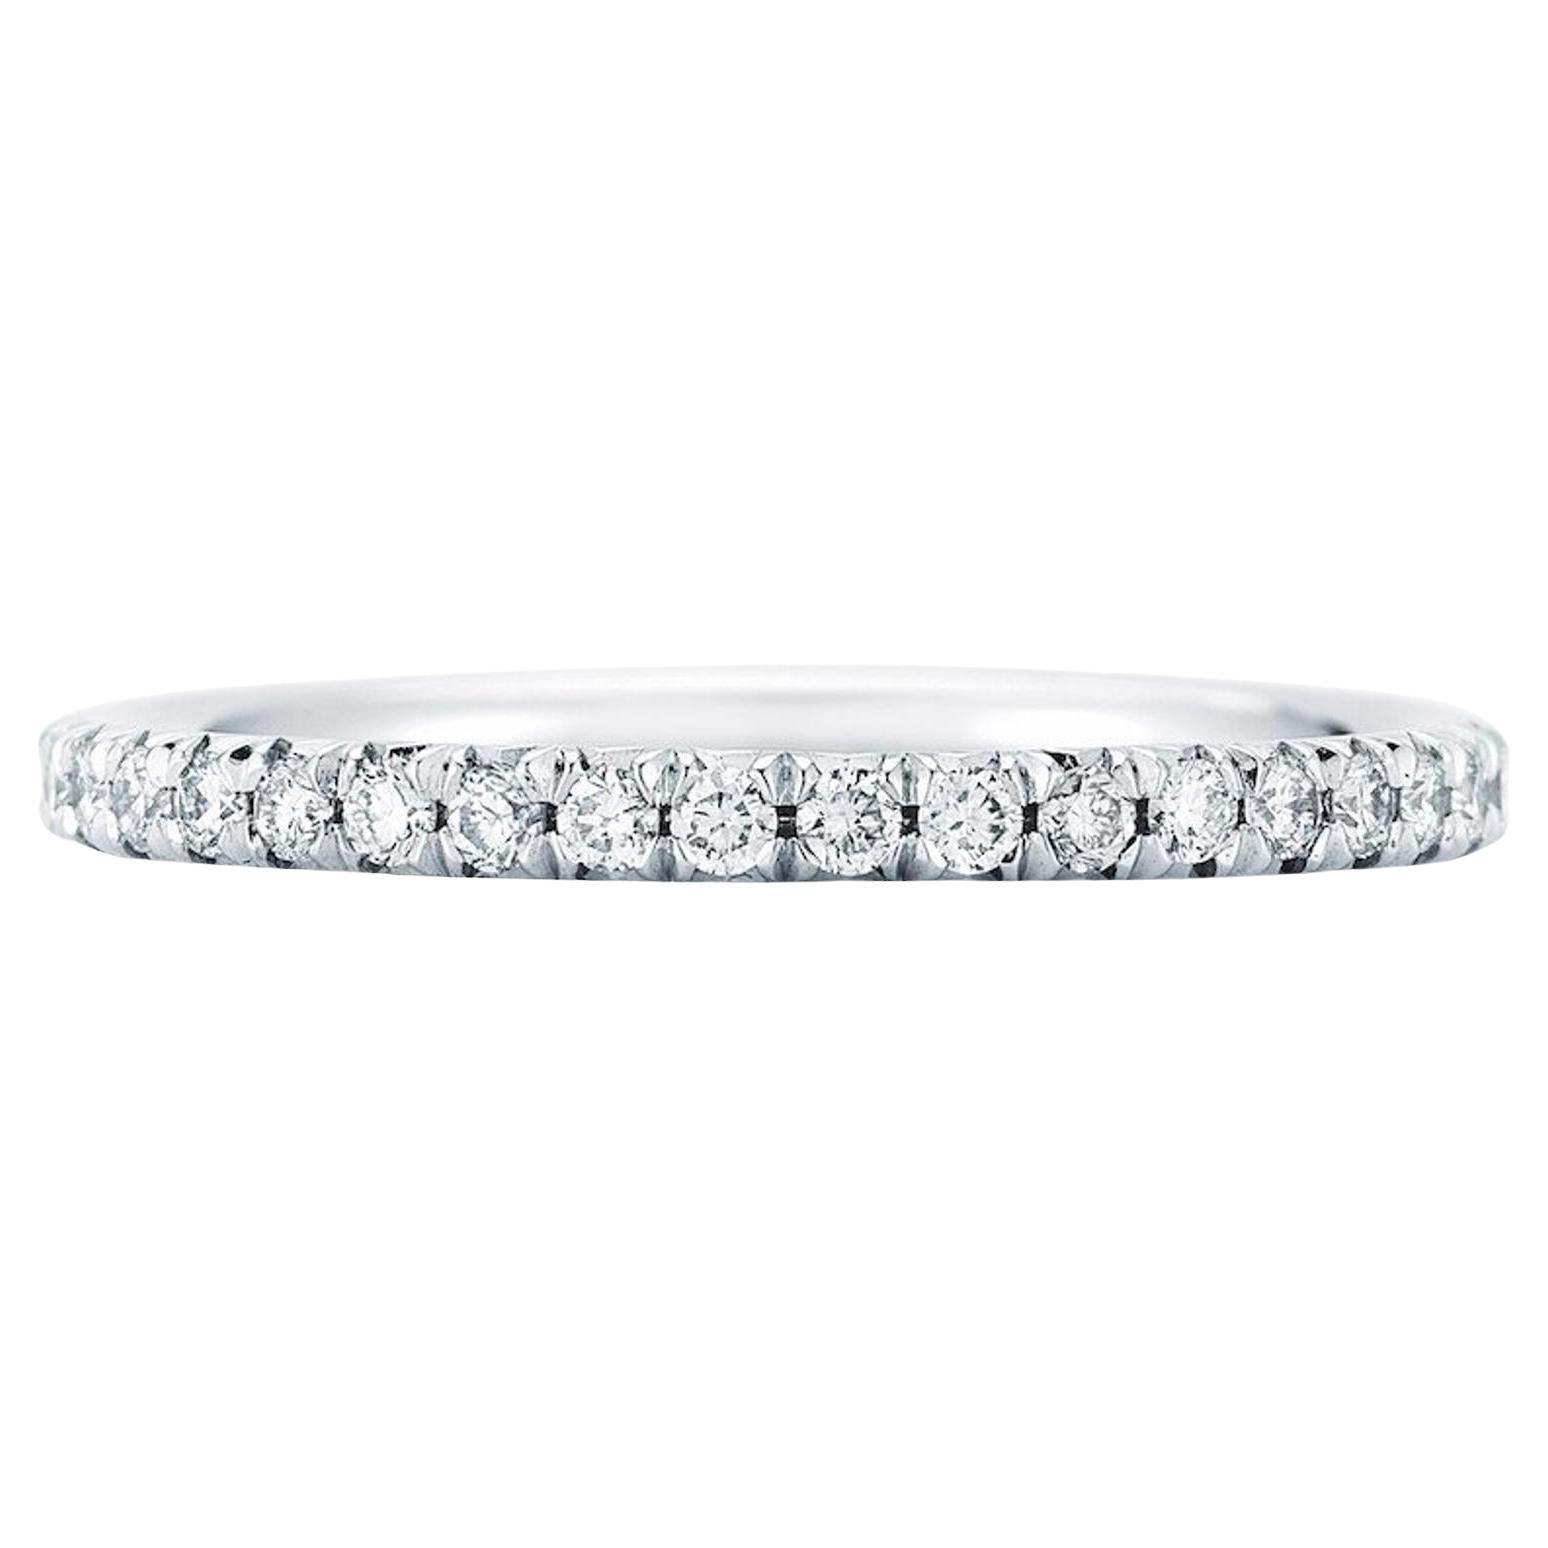 Rachael Koen French Pave Diamond Eternity Band 18K White Gold 0.45cttw For Sale